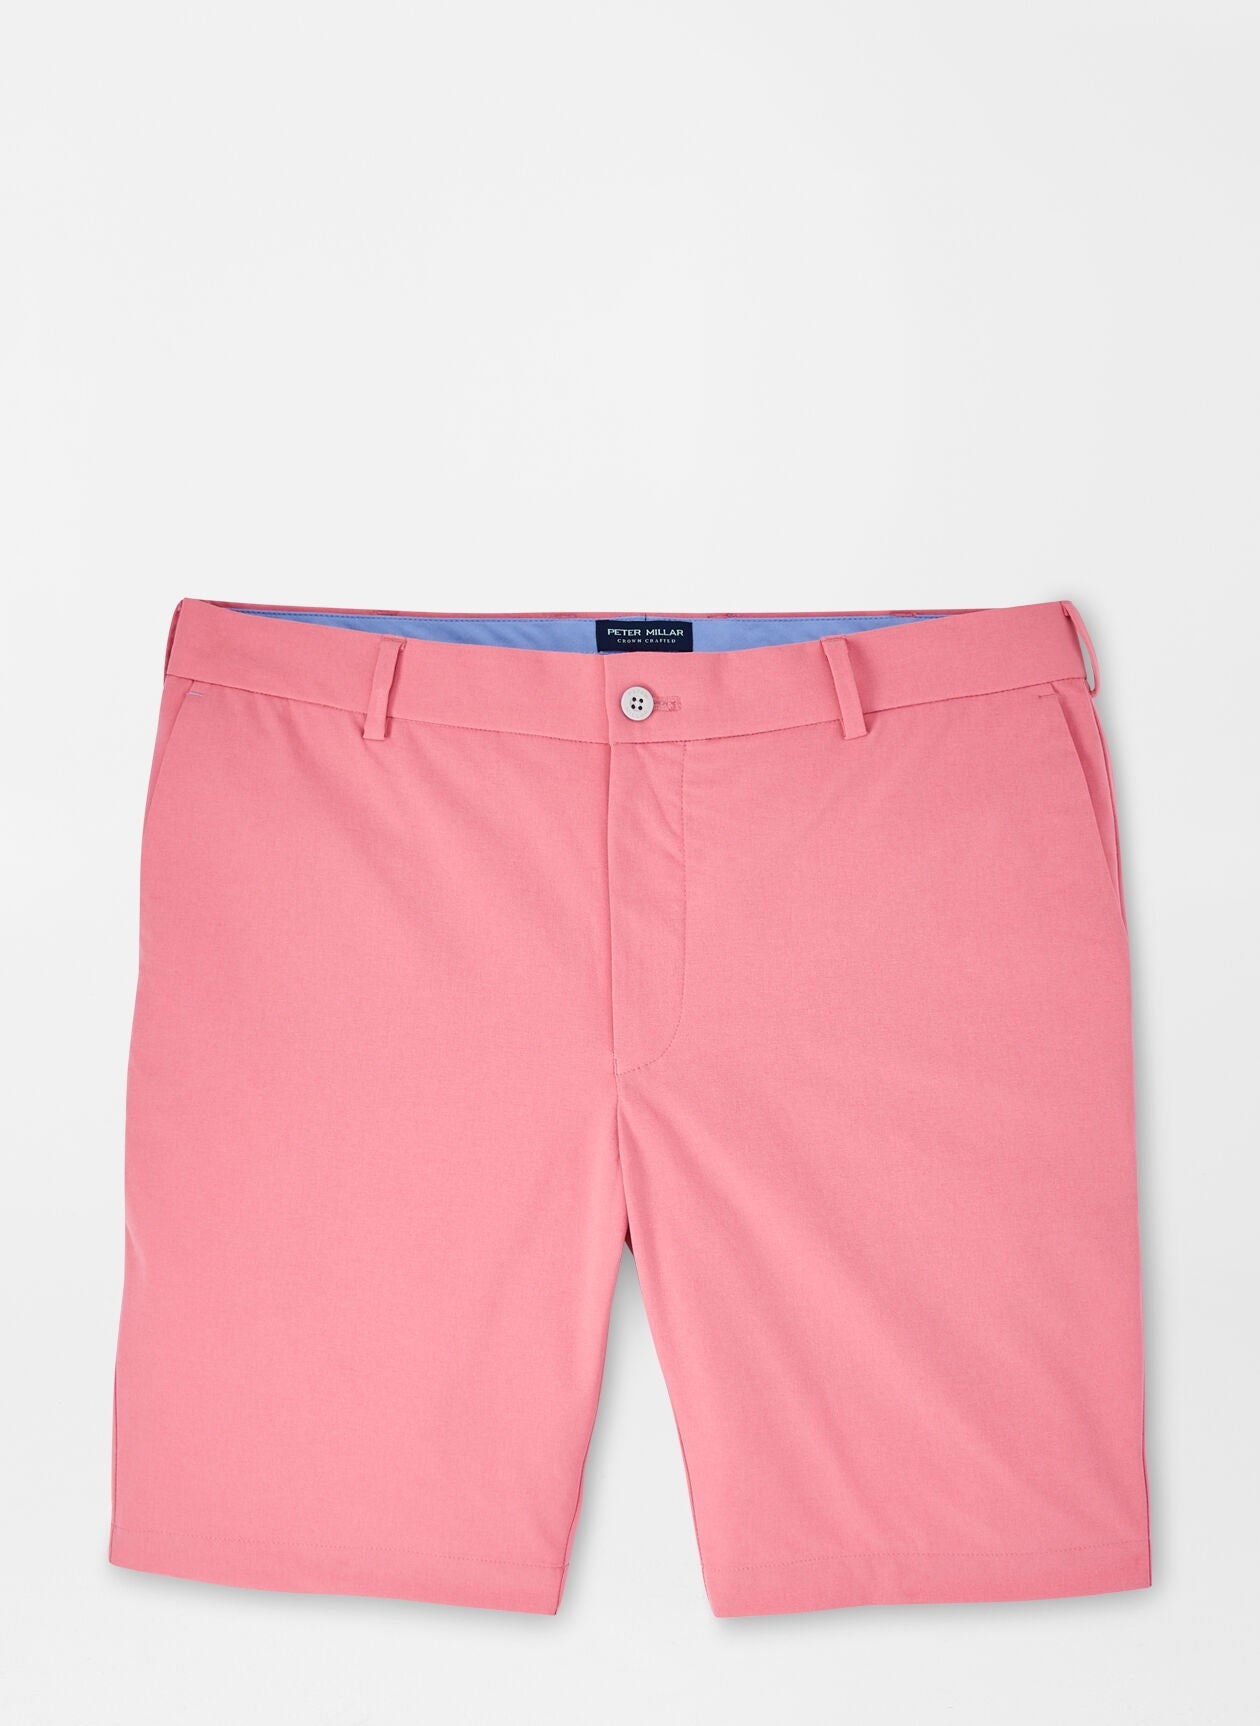 Peter Millar Surge Performance Short in Red Pear